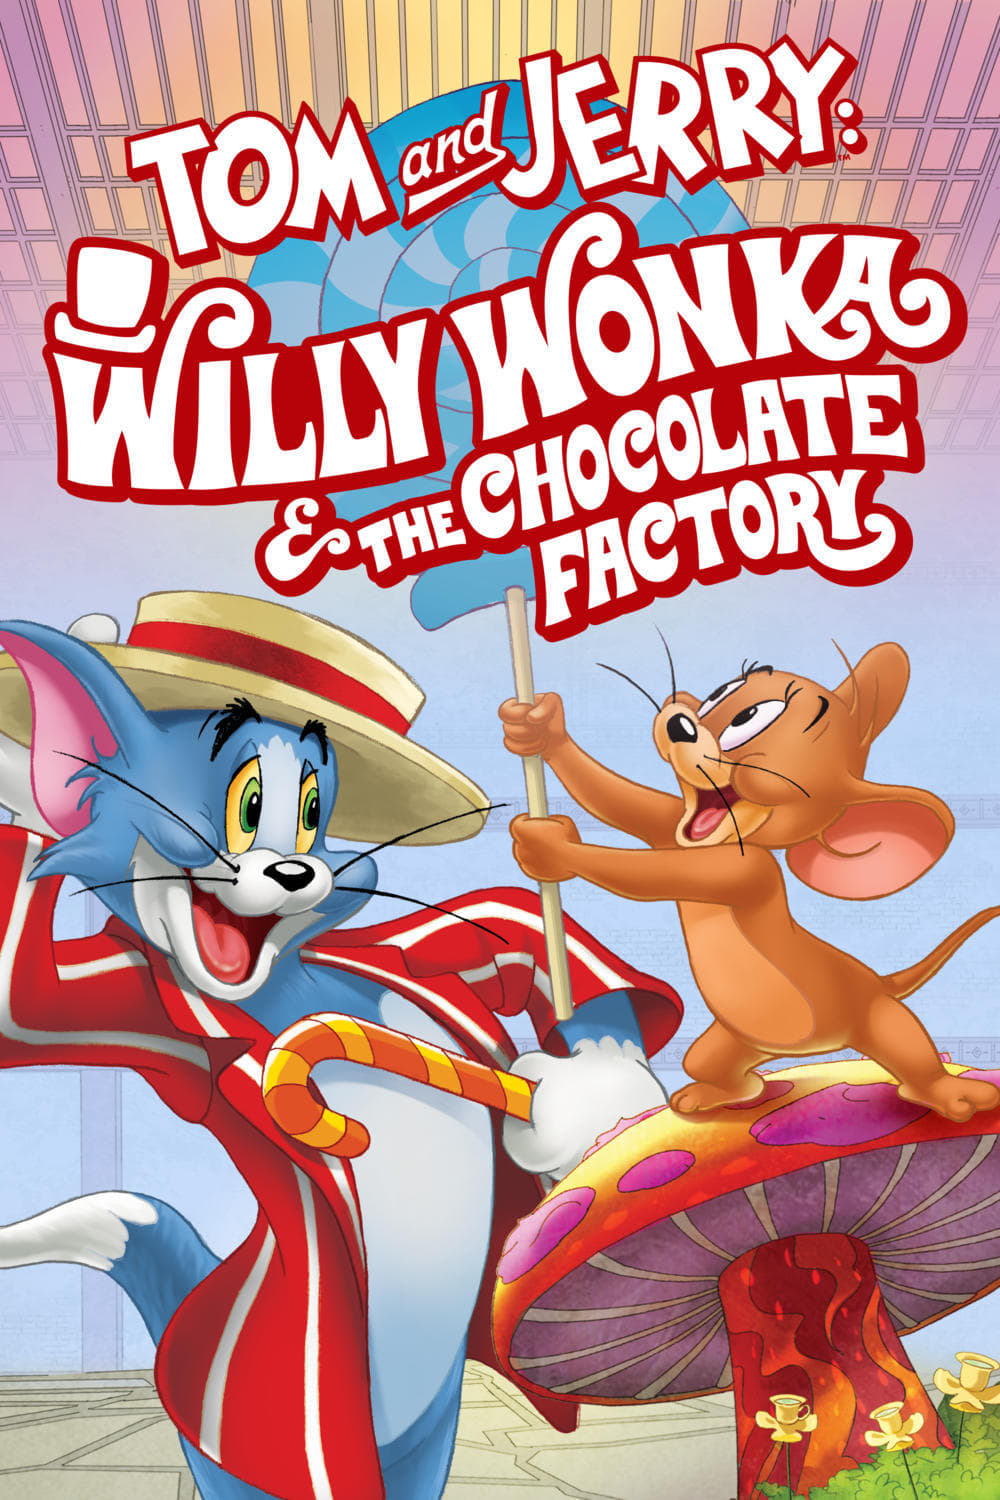 Poster for the movie "Tom and Jerry: Willy Wonka and the Chocolate Factory"